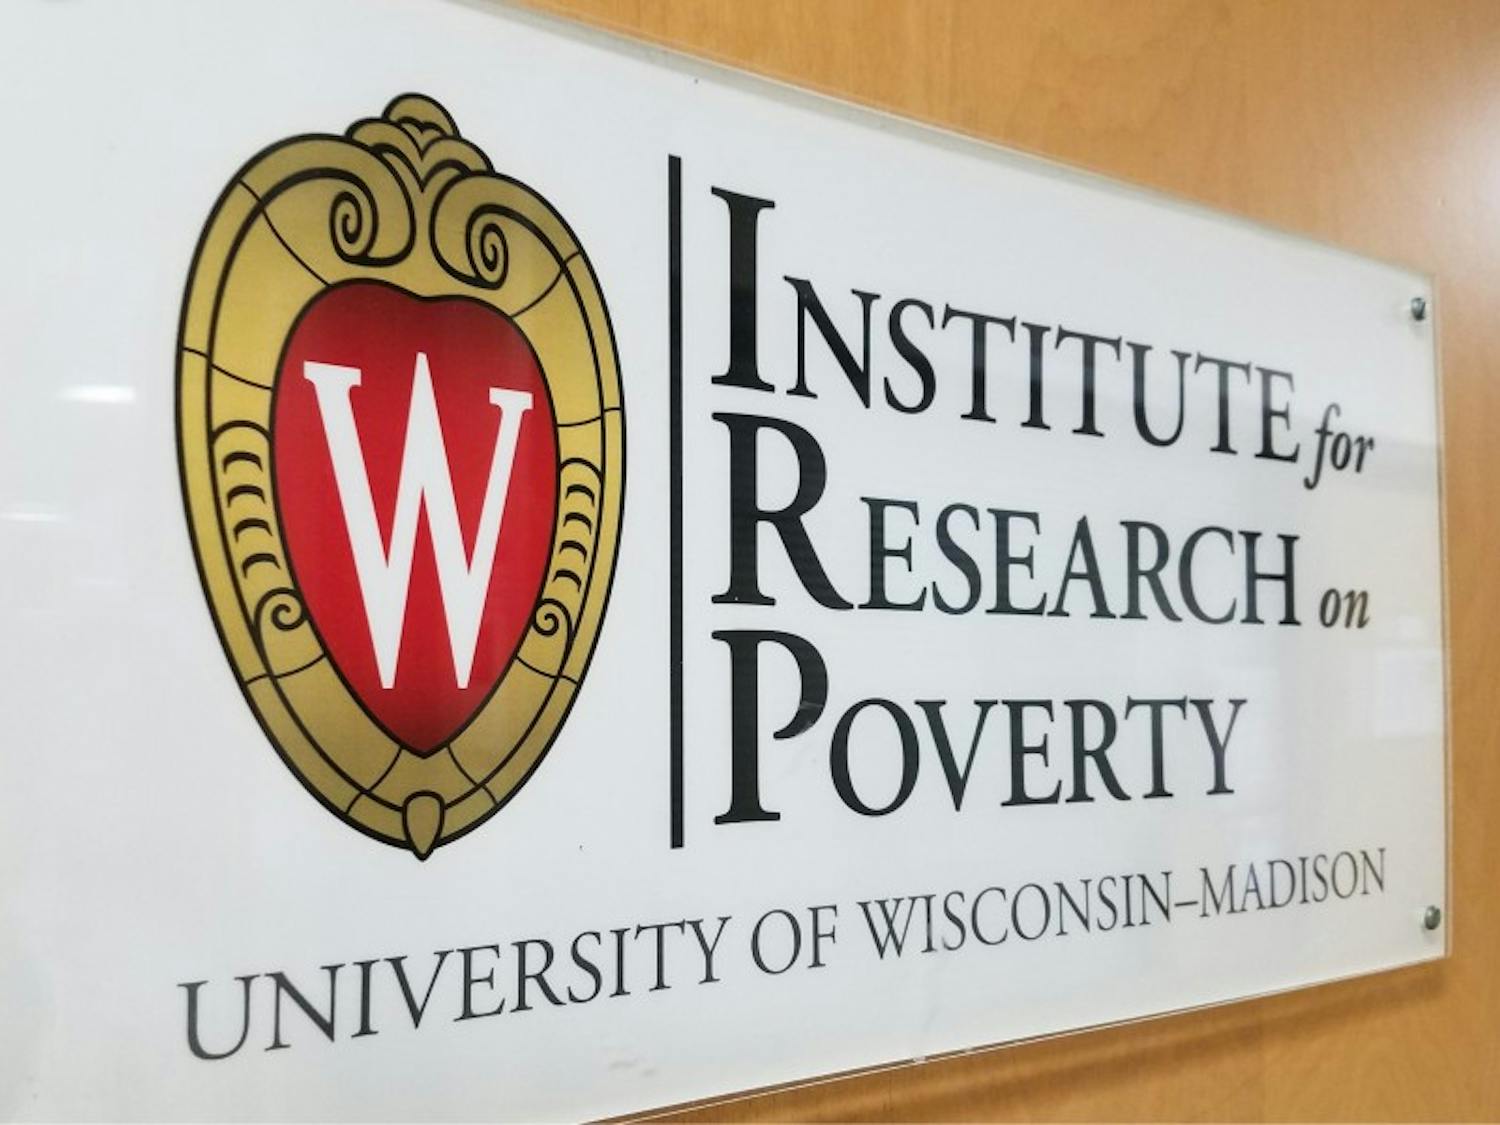 After helping to spearhead the nation’s very first coordinated policy efforts against poverty, UW-Madison’s Institute for Research on Poverty has continued to study the central problems and solutions of socioeconomic hardship in America.